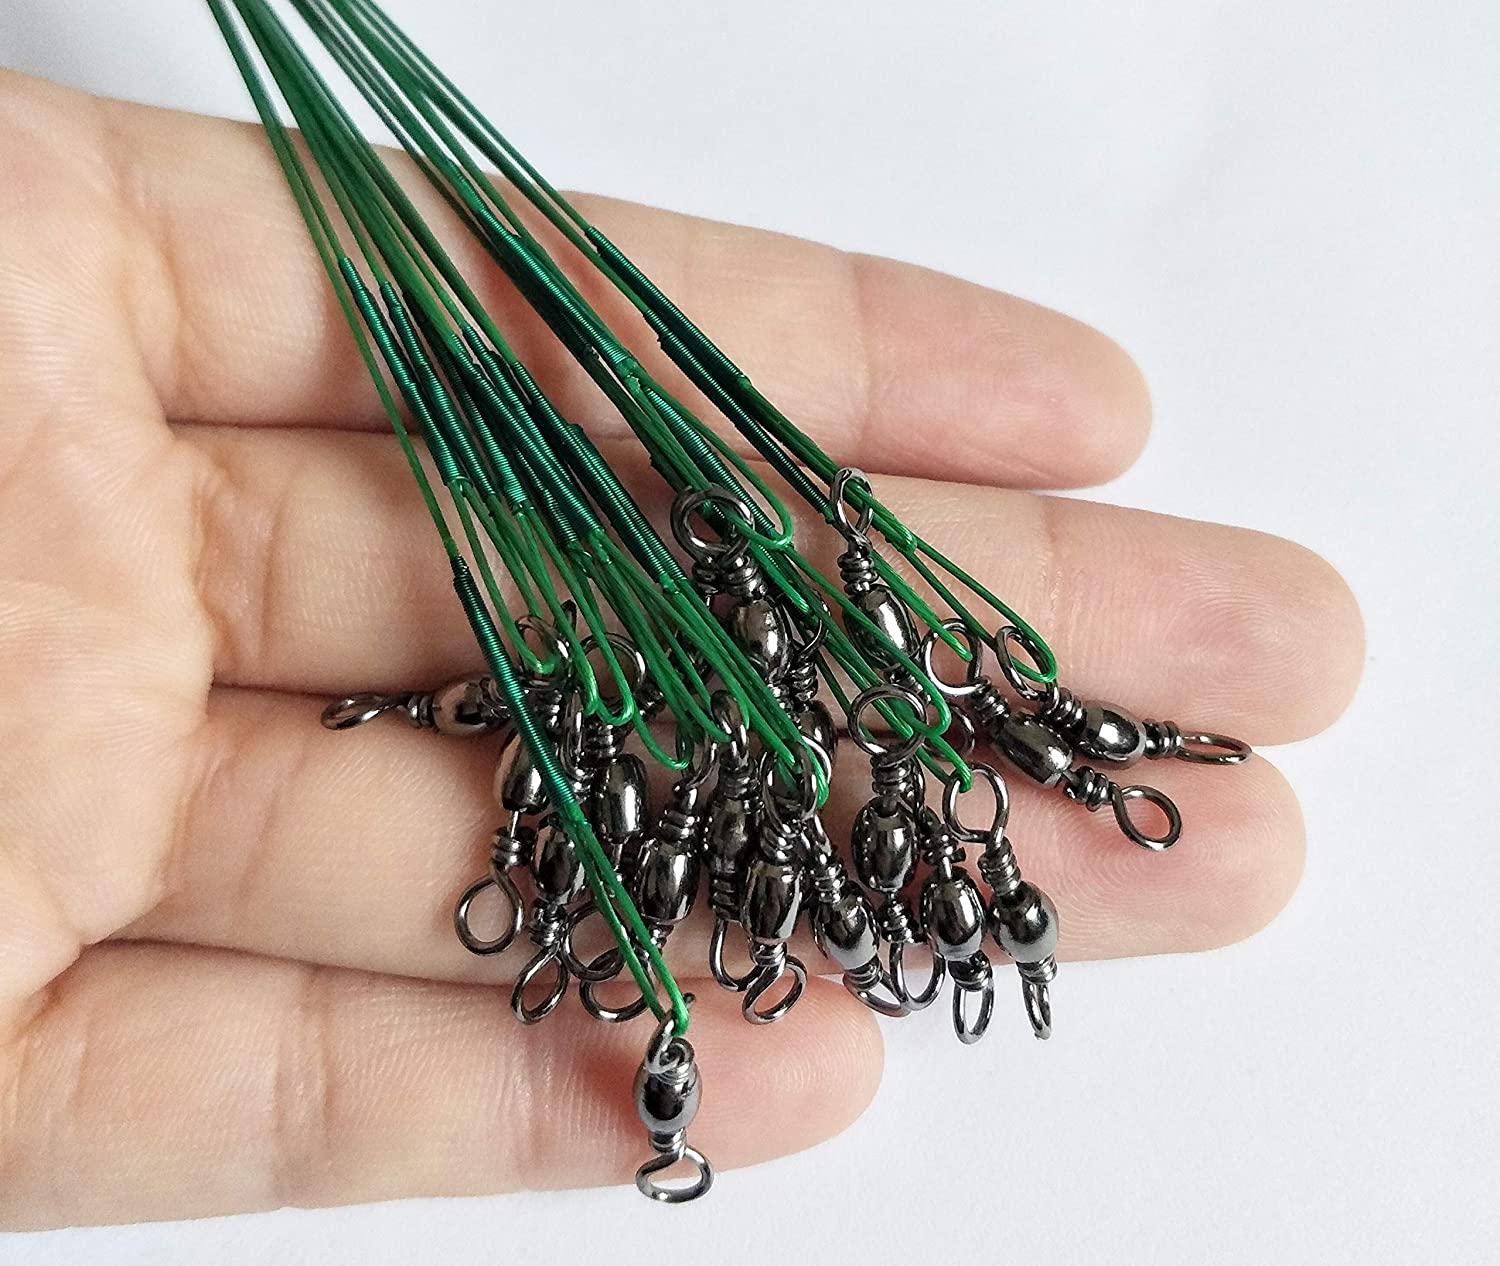 60pcs Fishing Wire Leaders Nylon-Coated Fishing Line Wire Leaders